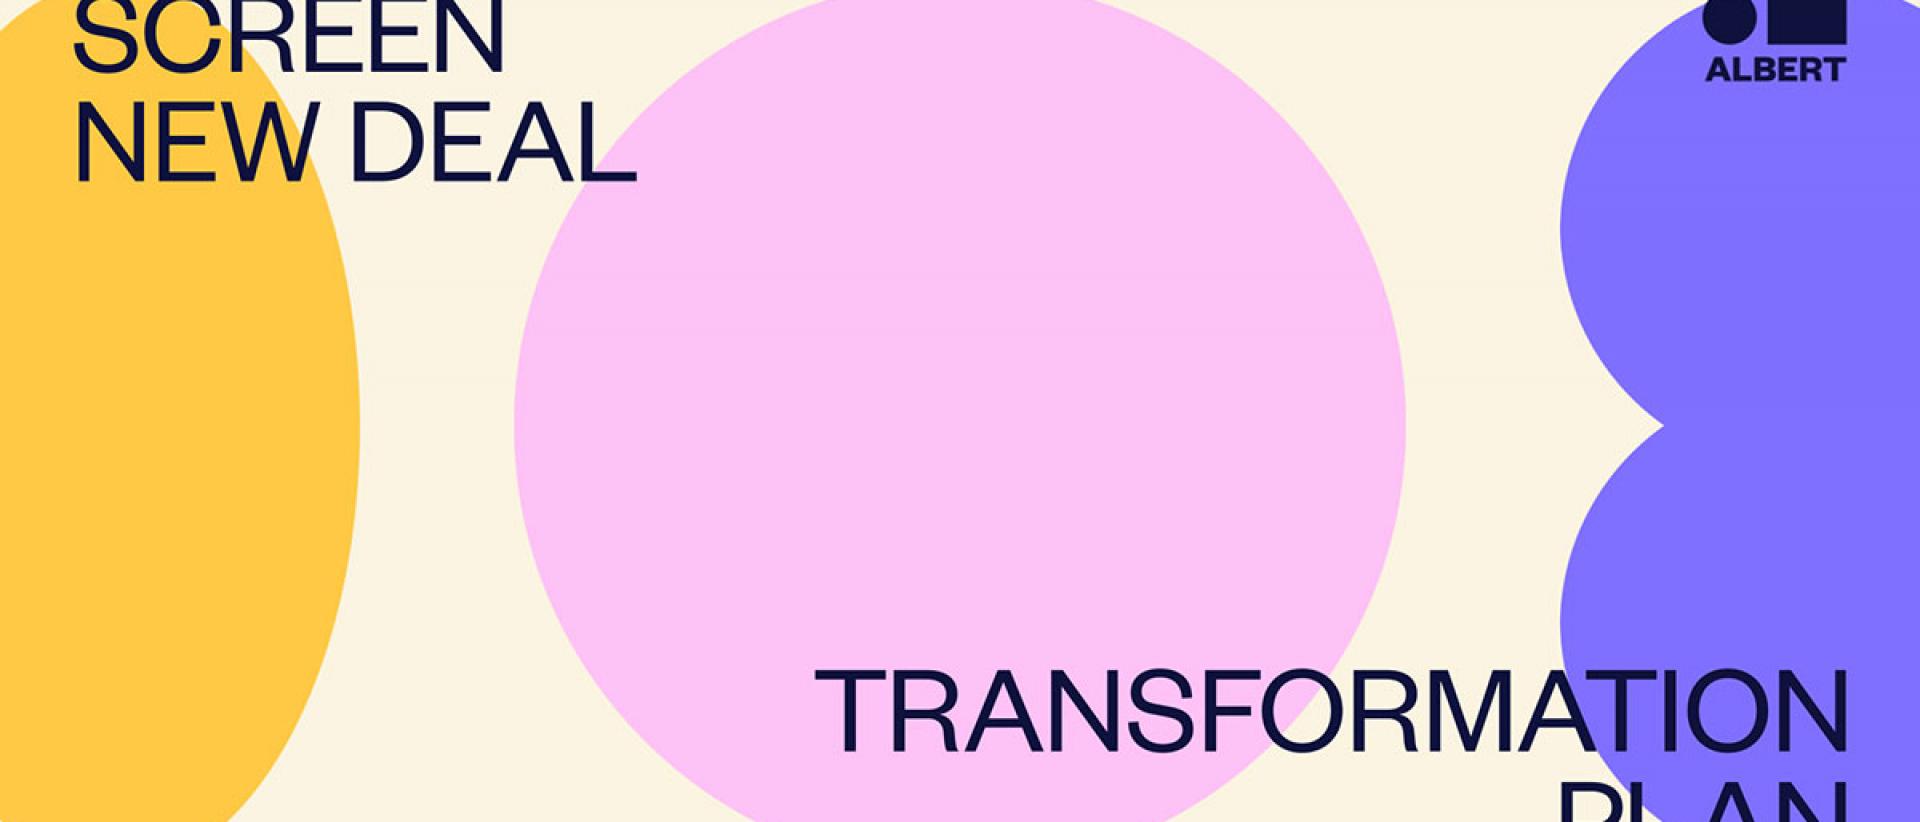 orange, pink and blue shapes with text Screen New Deal Transformation Plan